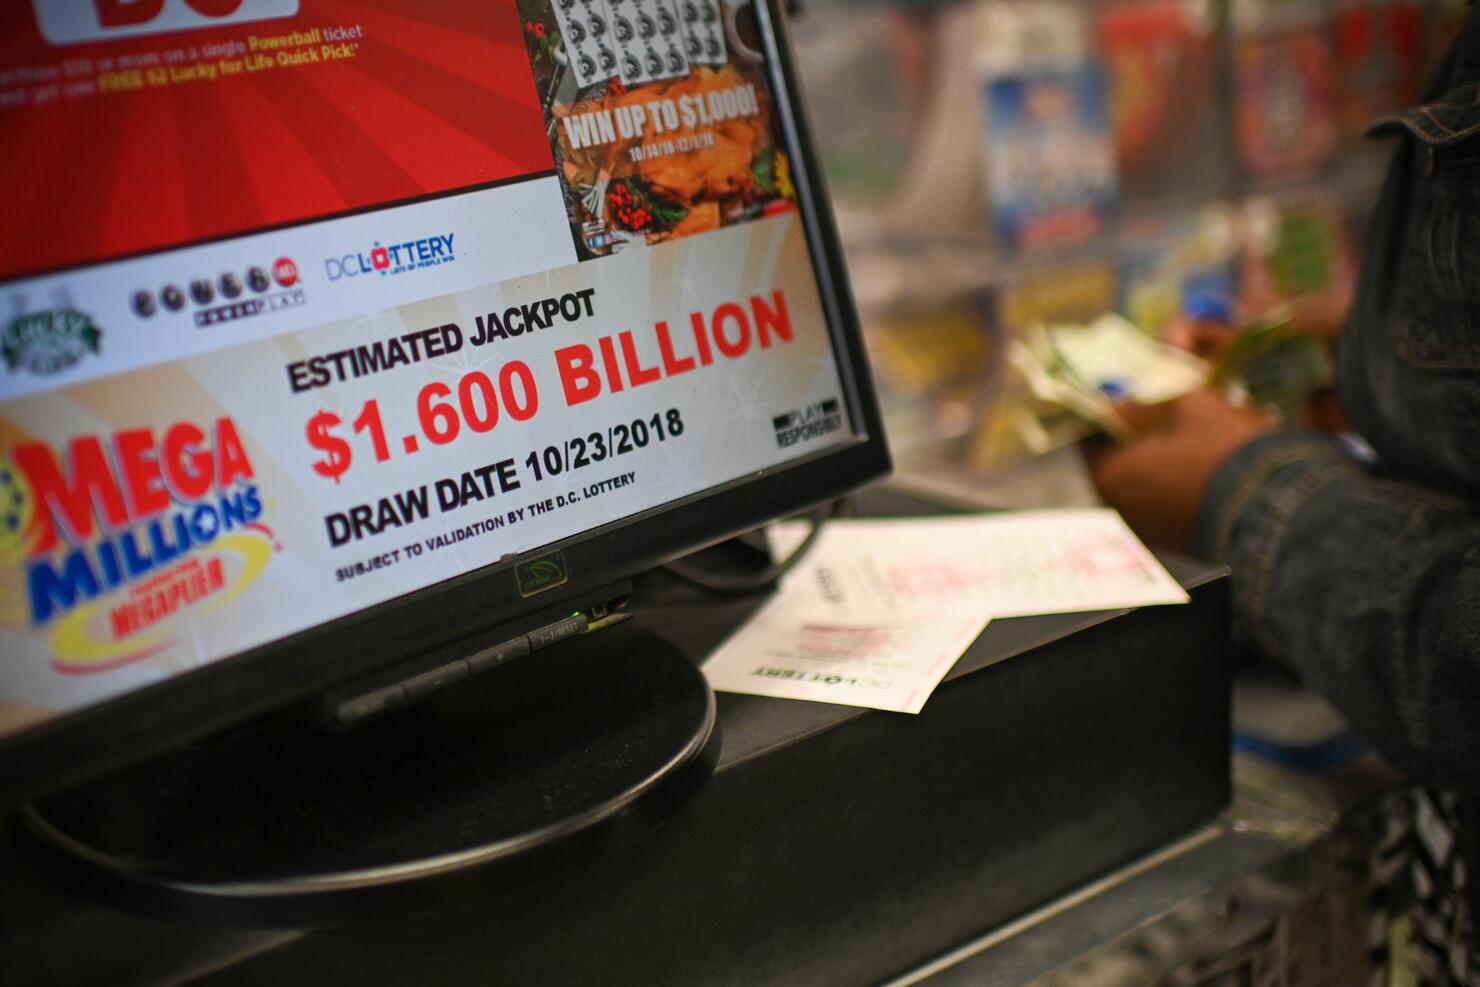 Mega Millions mega jackpot one of the top ten stories people searched for in 2018